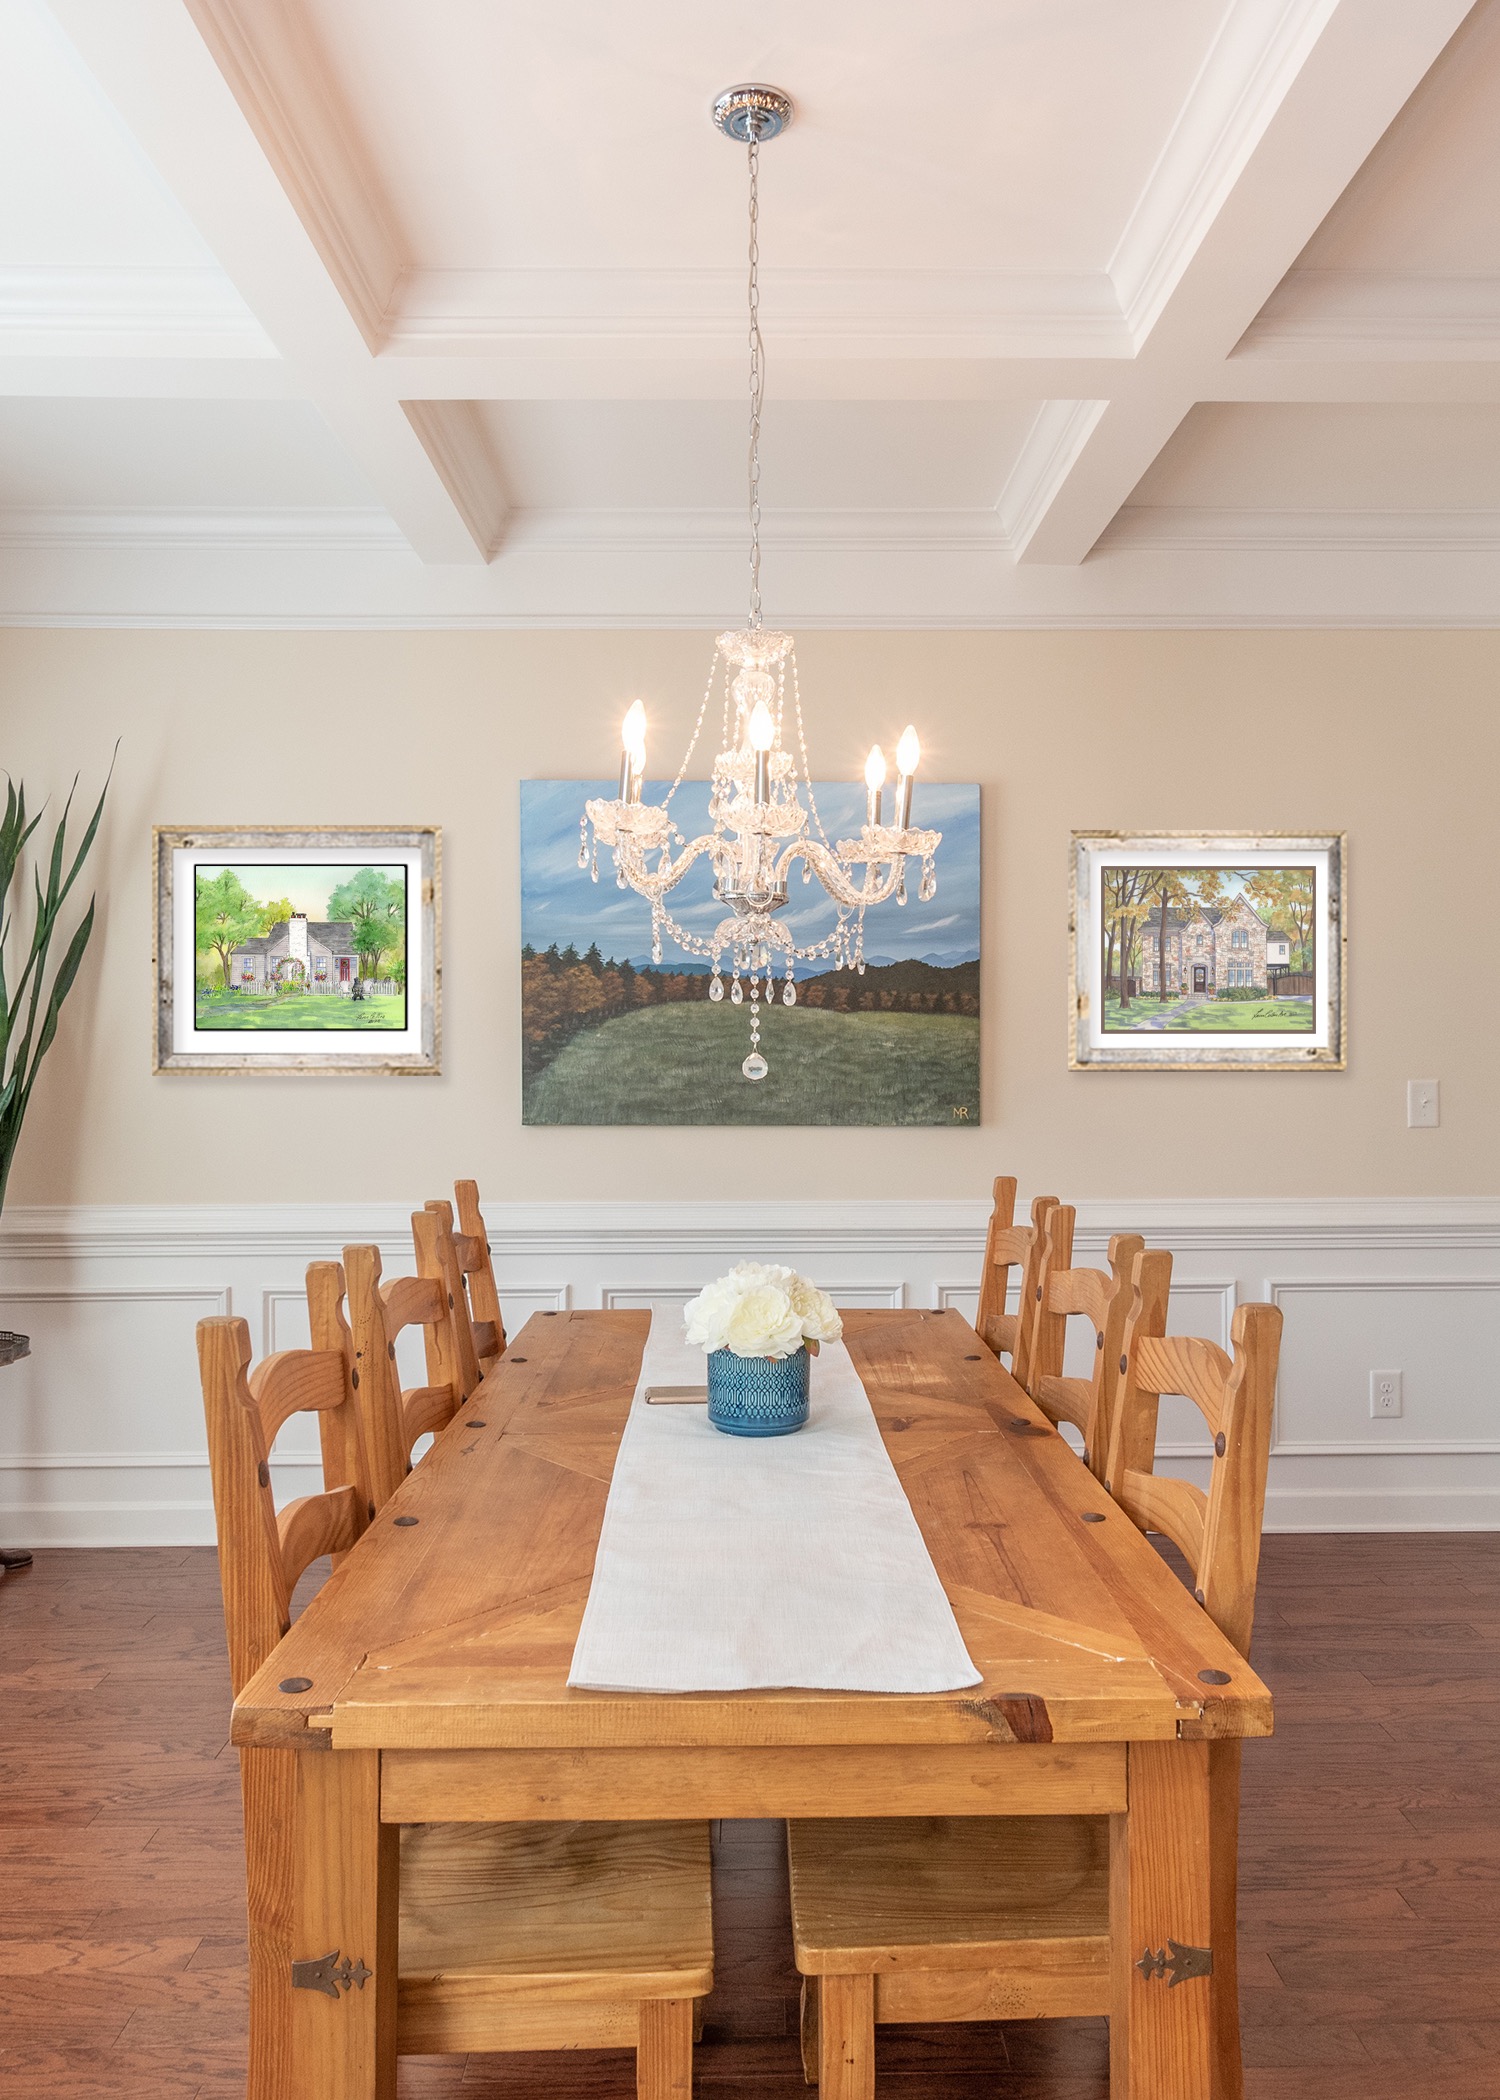 A pair of house potraits grace this dining room setting. 